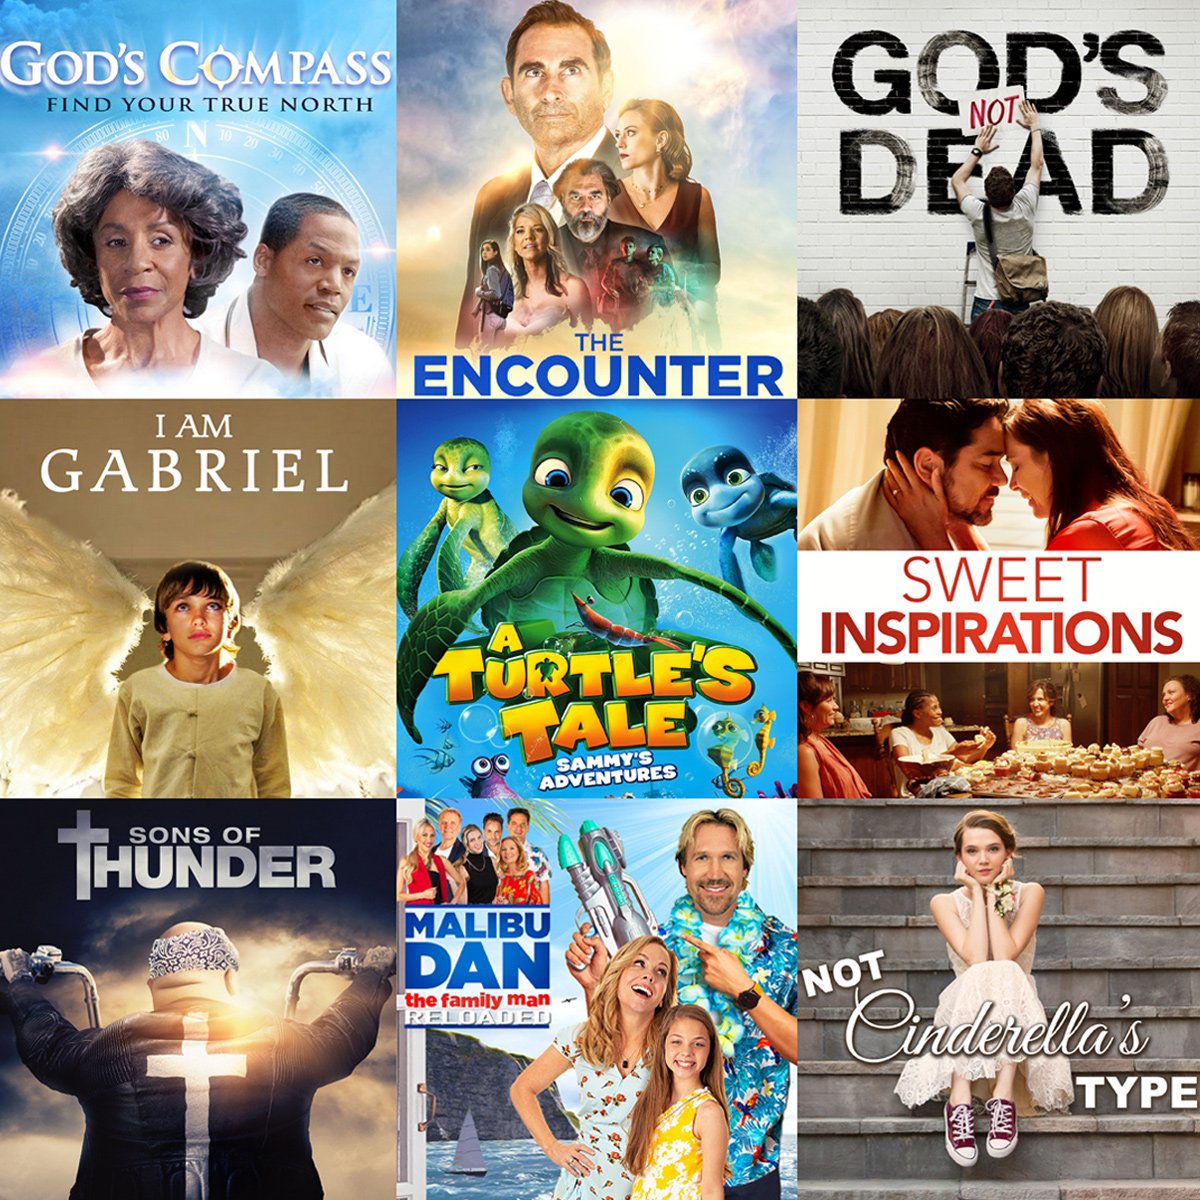 11 Christian Movies About the End Times